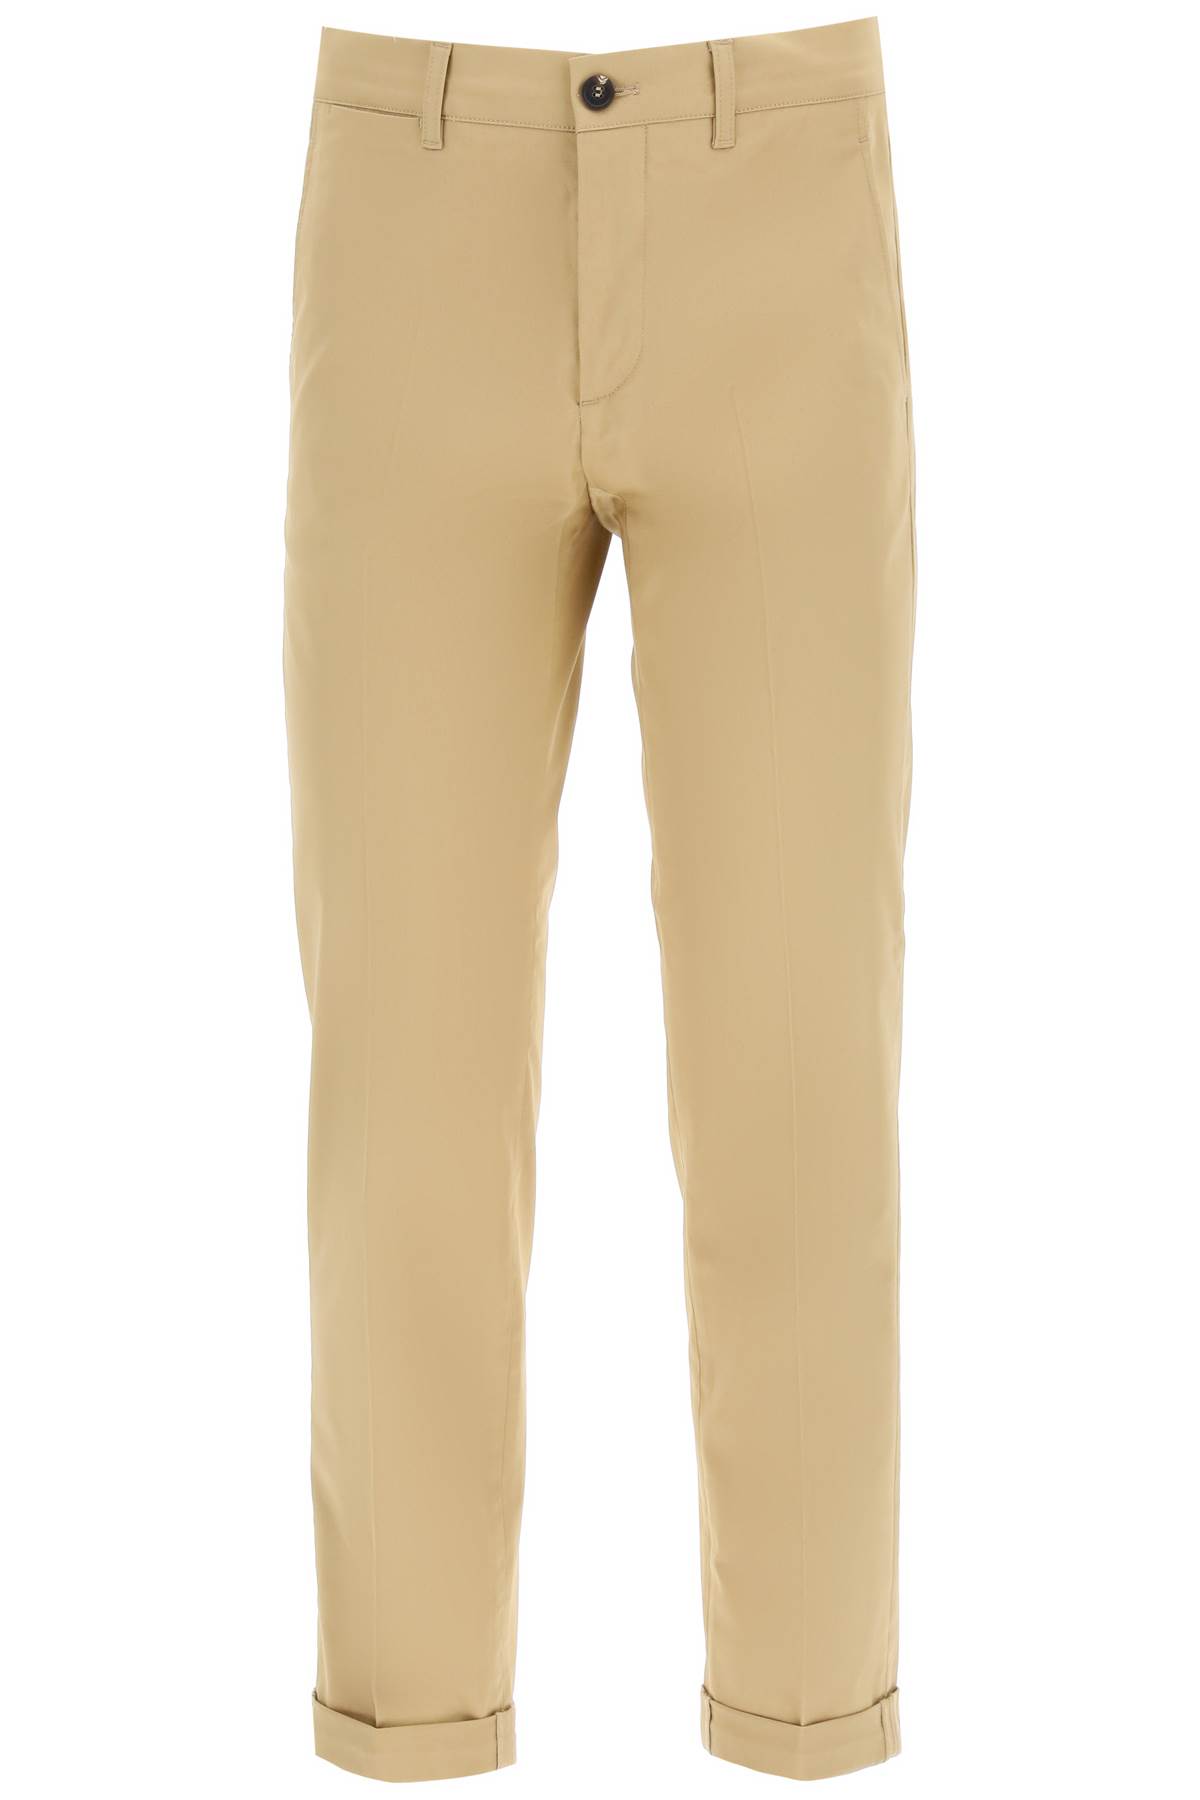 Golden Goose Chino Trousers Golden Collection